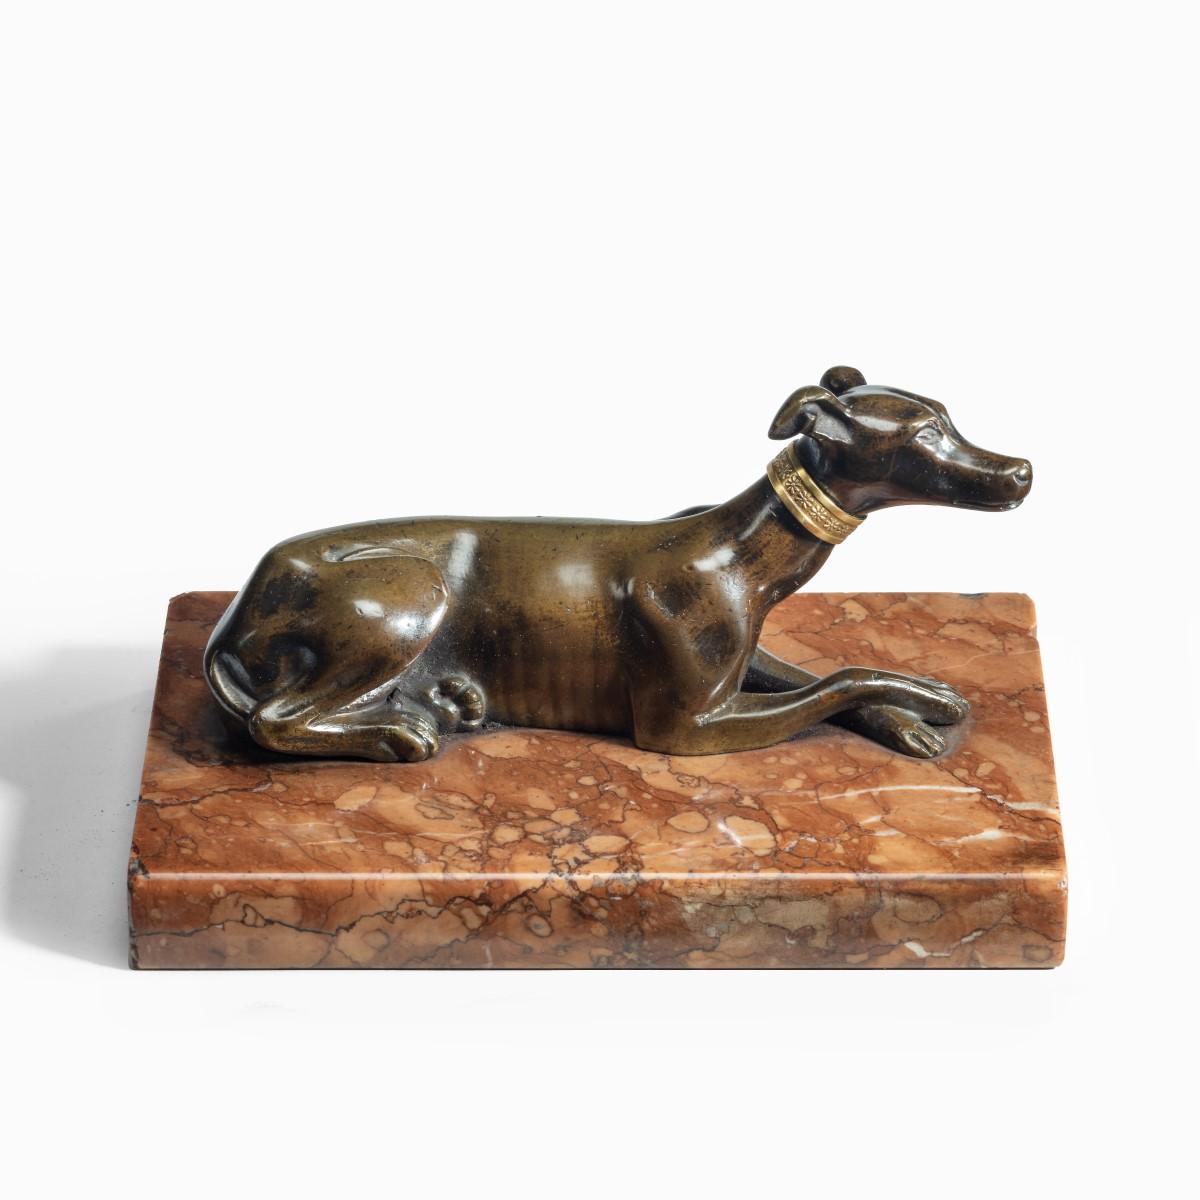 A charming Regency greyhound paperweight, the recumbent dog with its front paws crossed and wearing gilt collar picked out with flowerheads, all on a marble base. English, circa 1815.